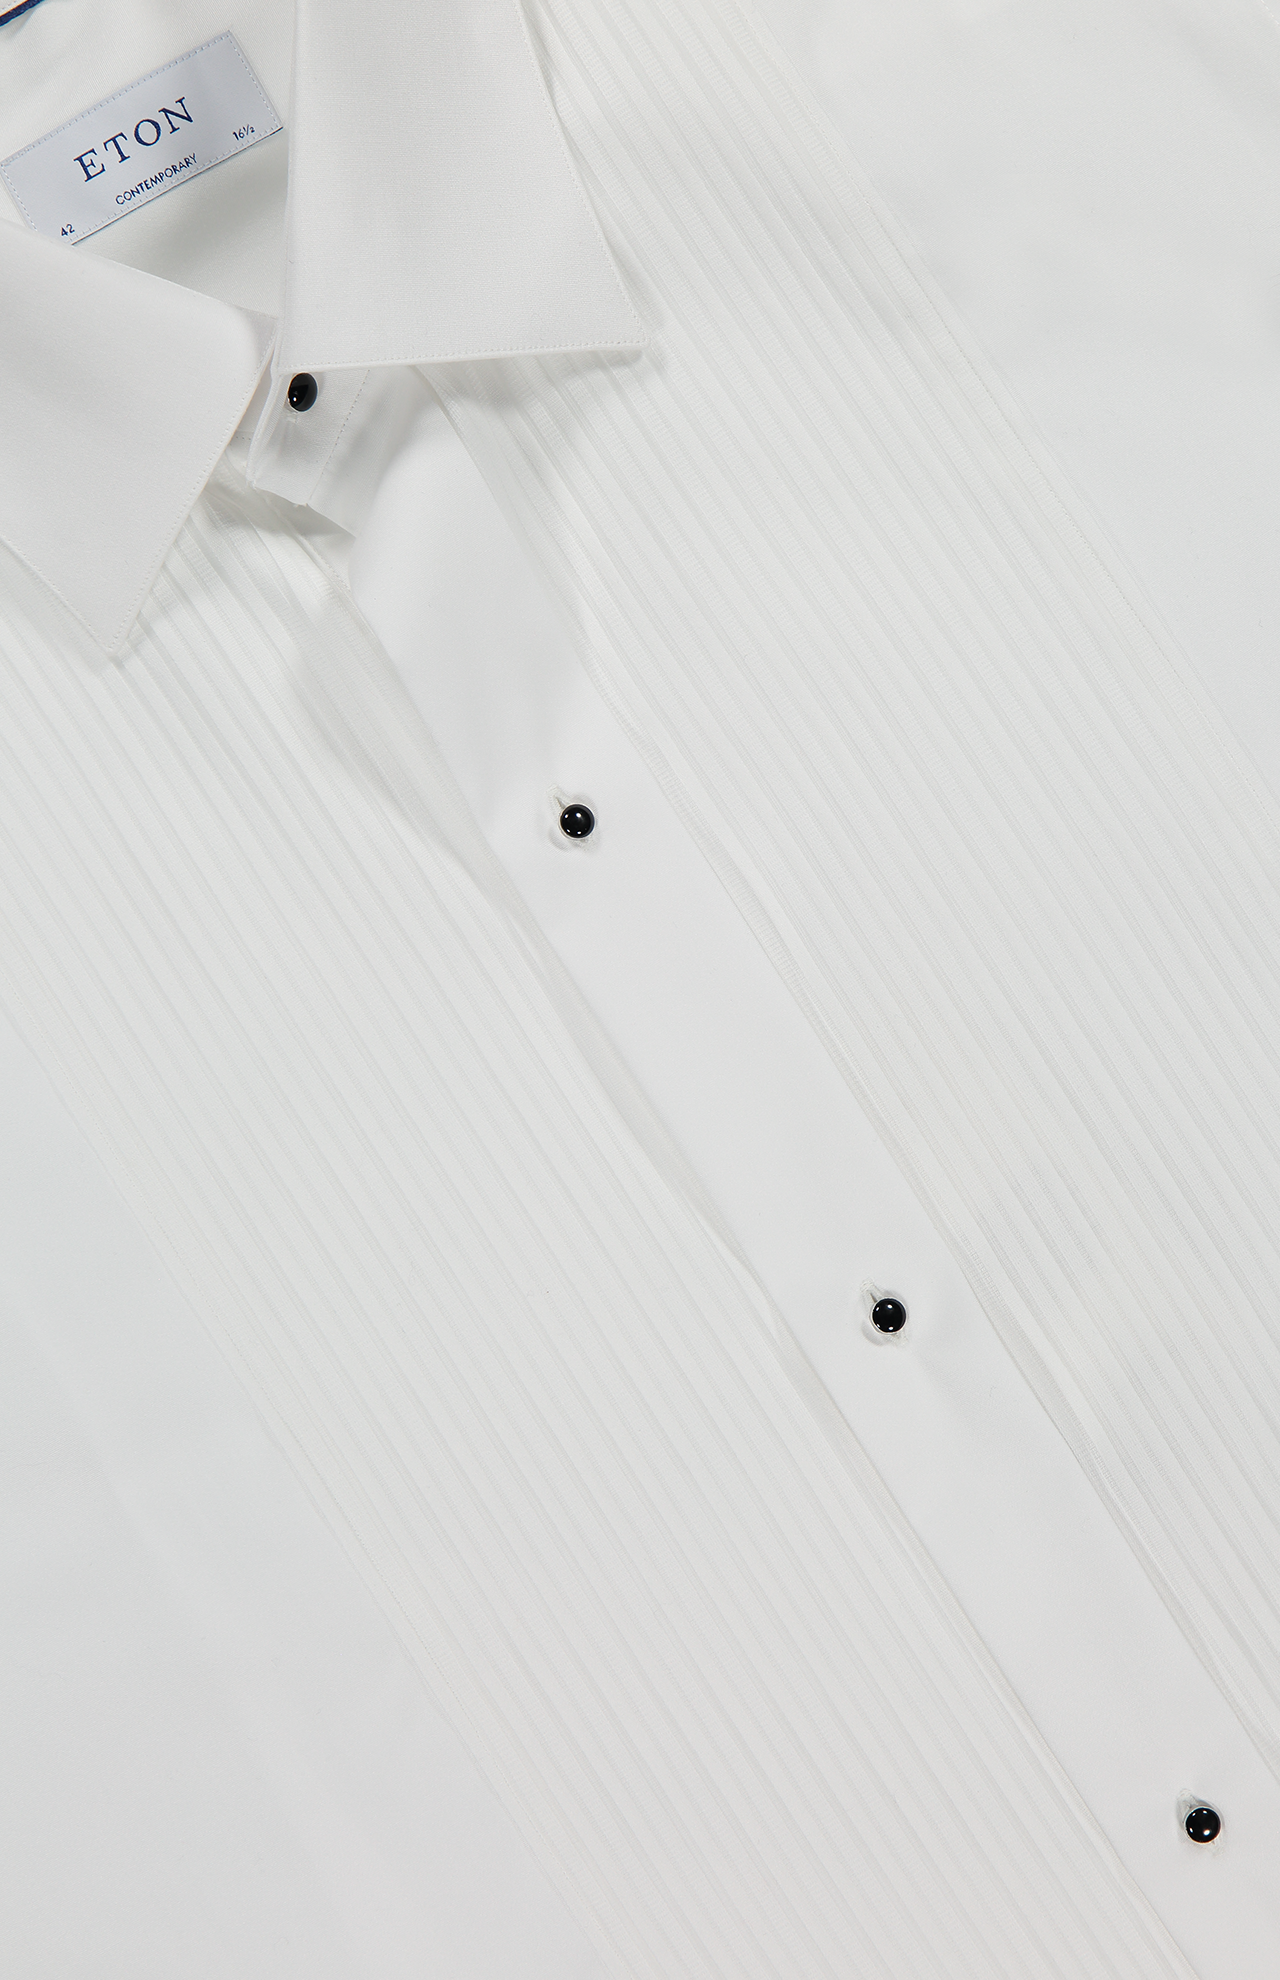 Eton Bibbed Tuxedo Shirt in White with Contrast Buttons - Collar Detail Image (4441564741747)